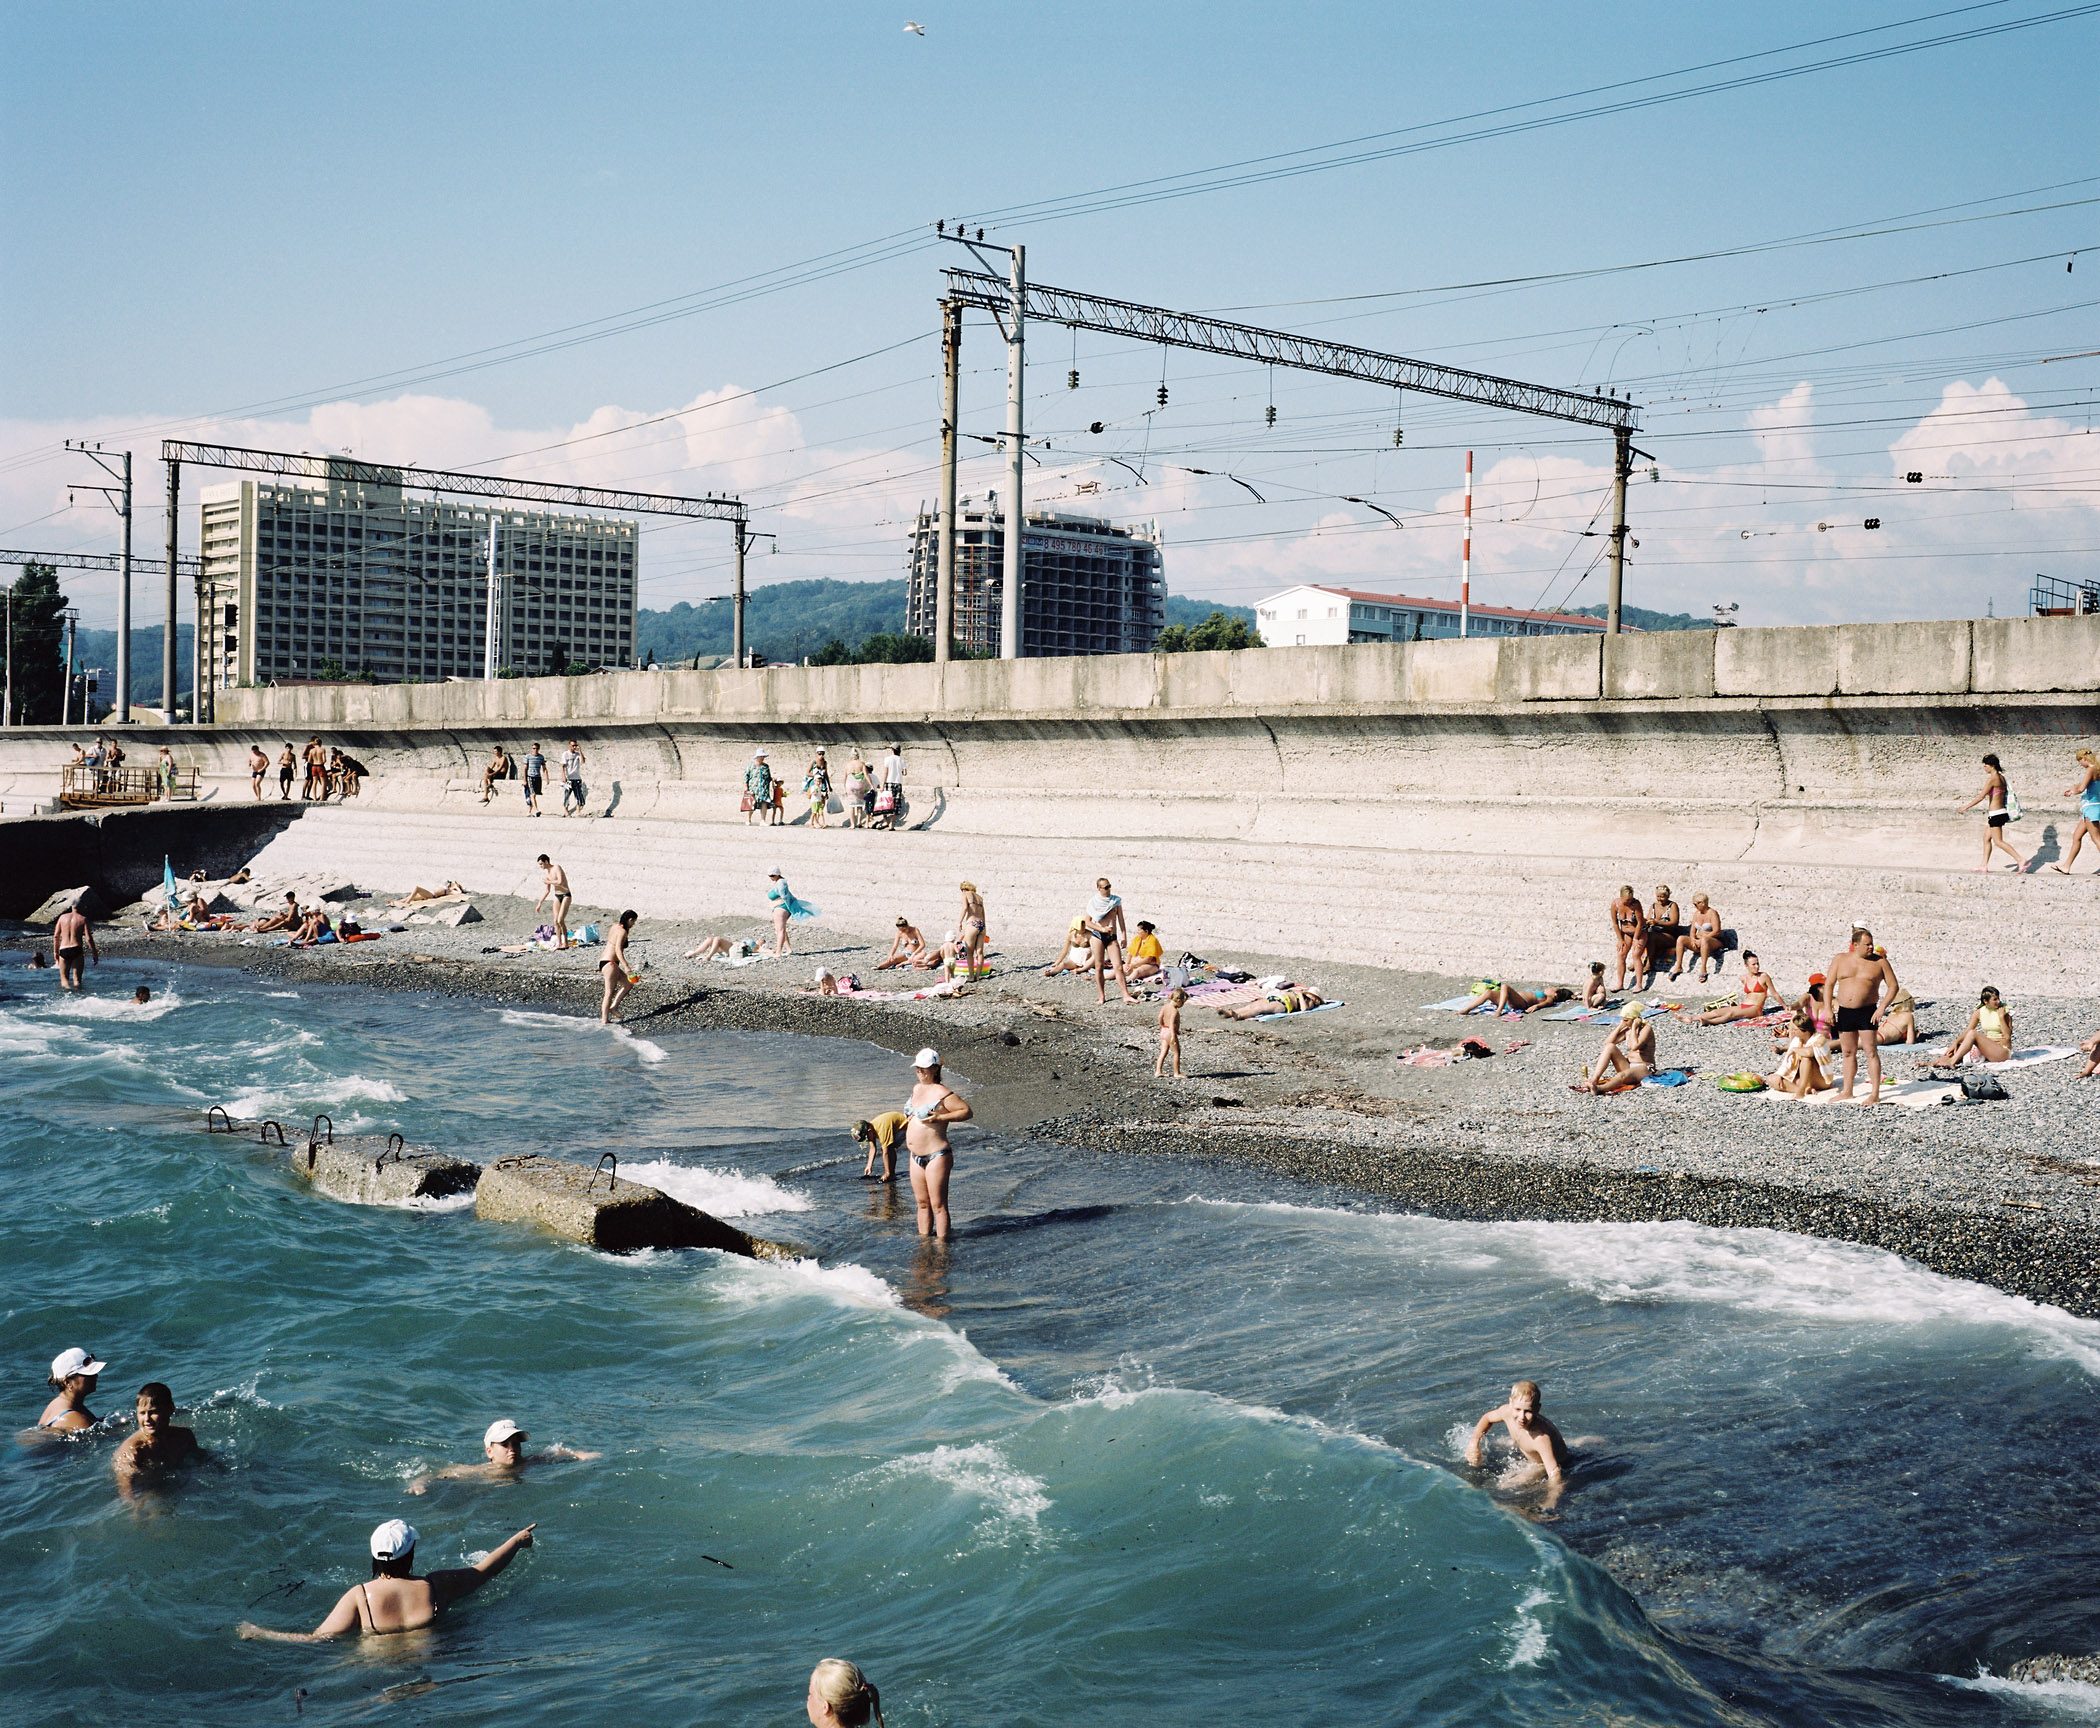     Rob Hornstra, The Beach, Adler, Sochi Region, 2011  Â© Rob Hornstra / Flatland Gallery. From: An Atlas of War and Tourism in the Caucasus (Aperture, 2013)

